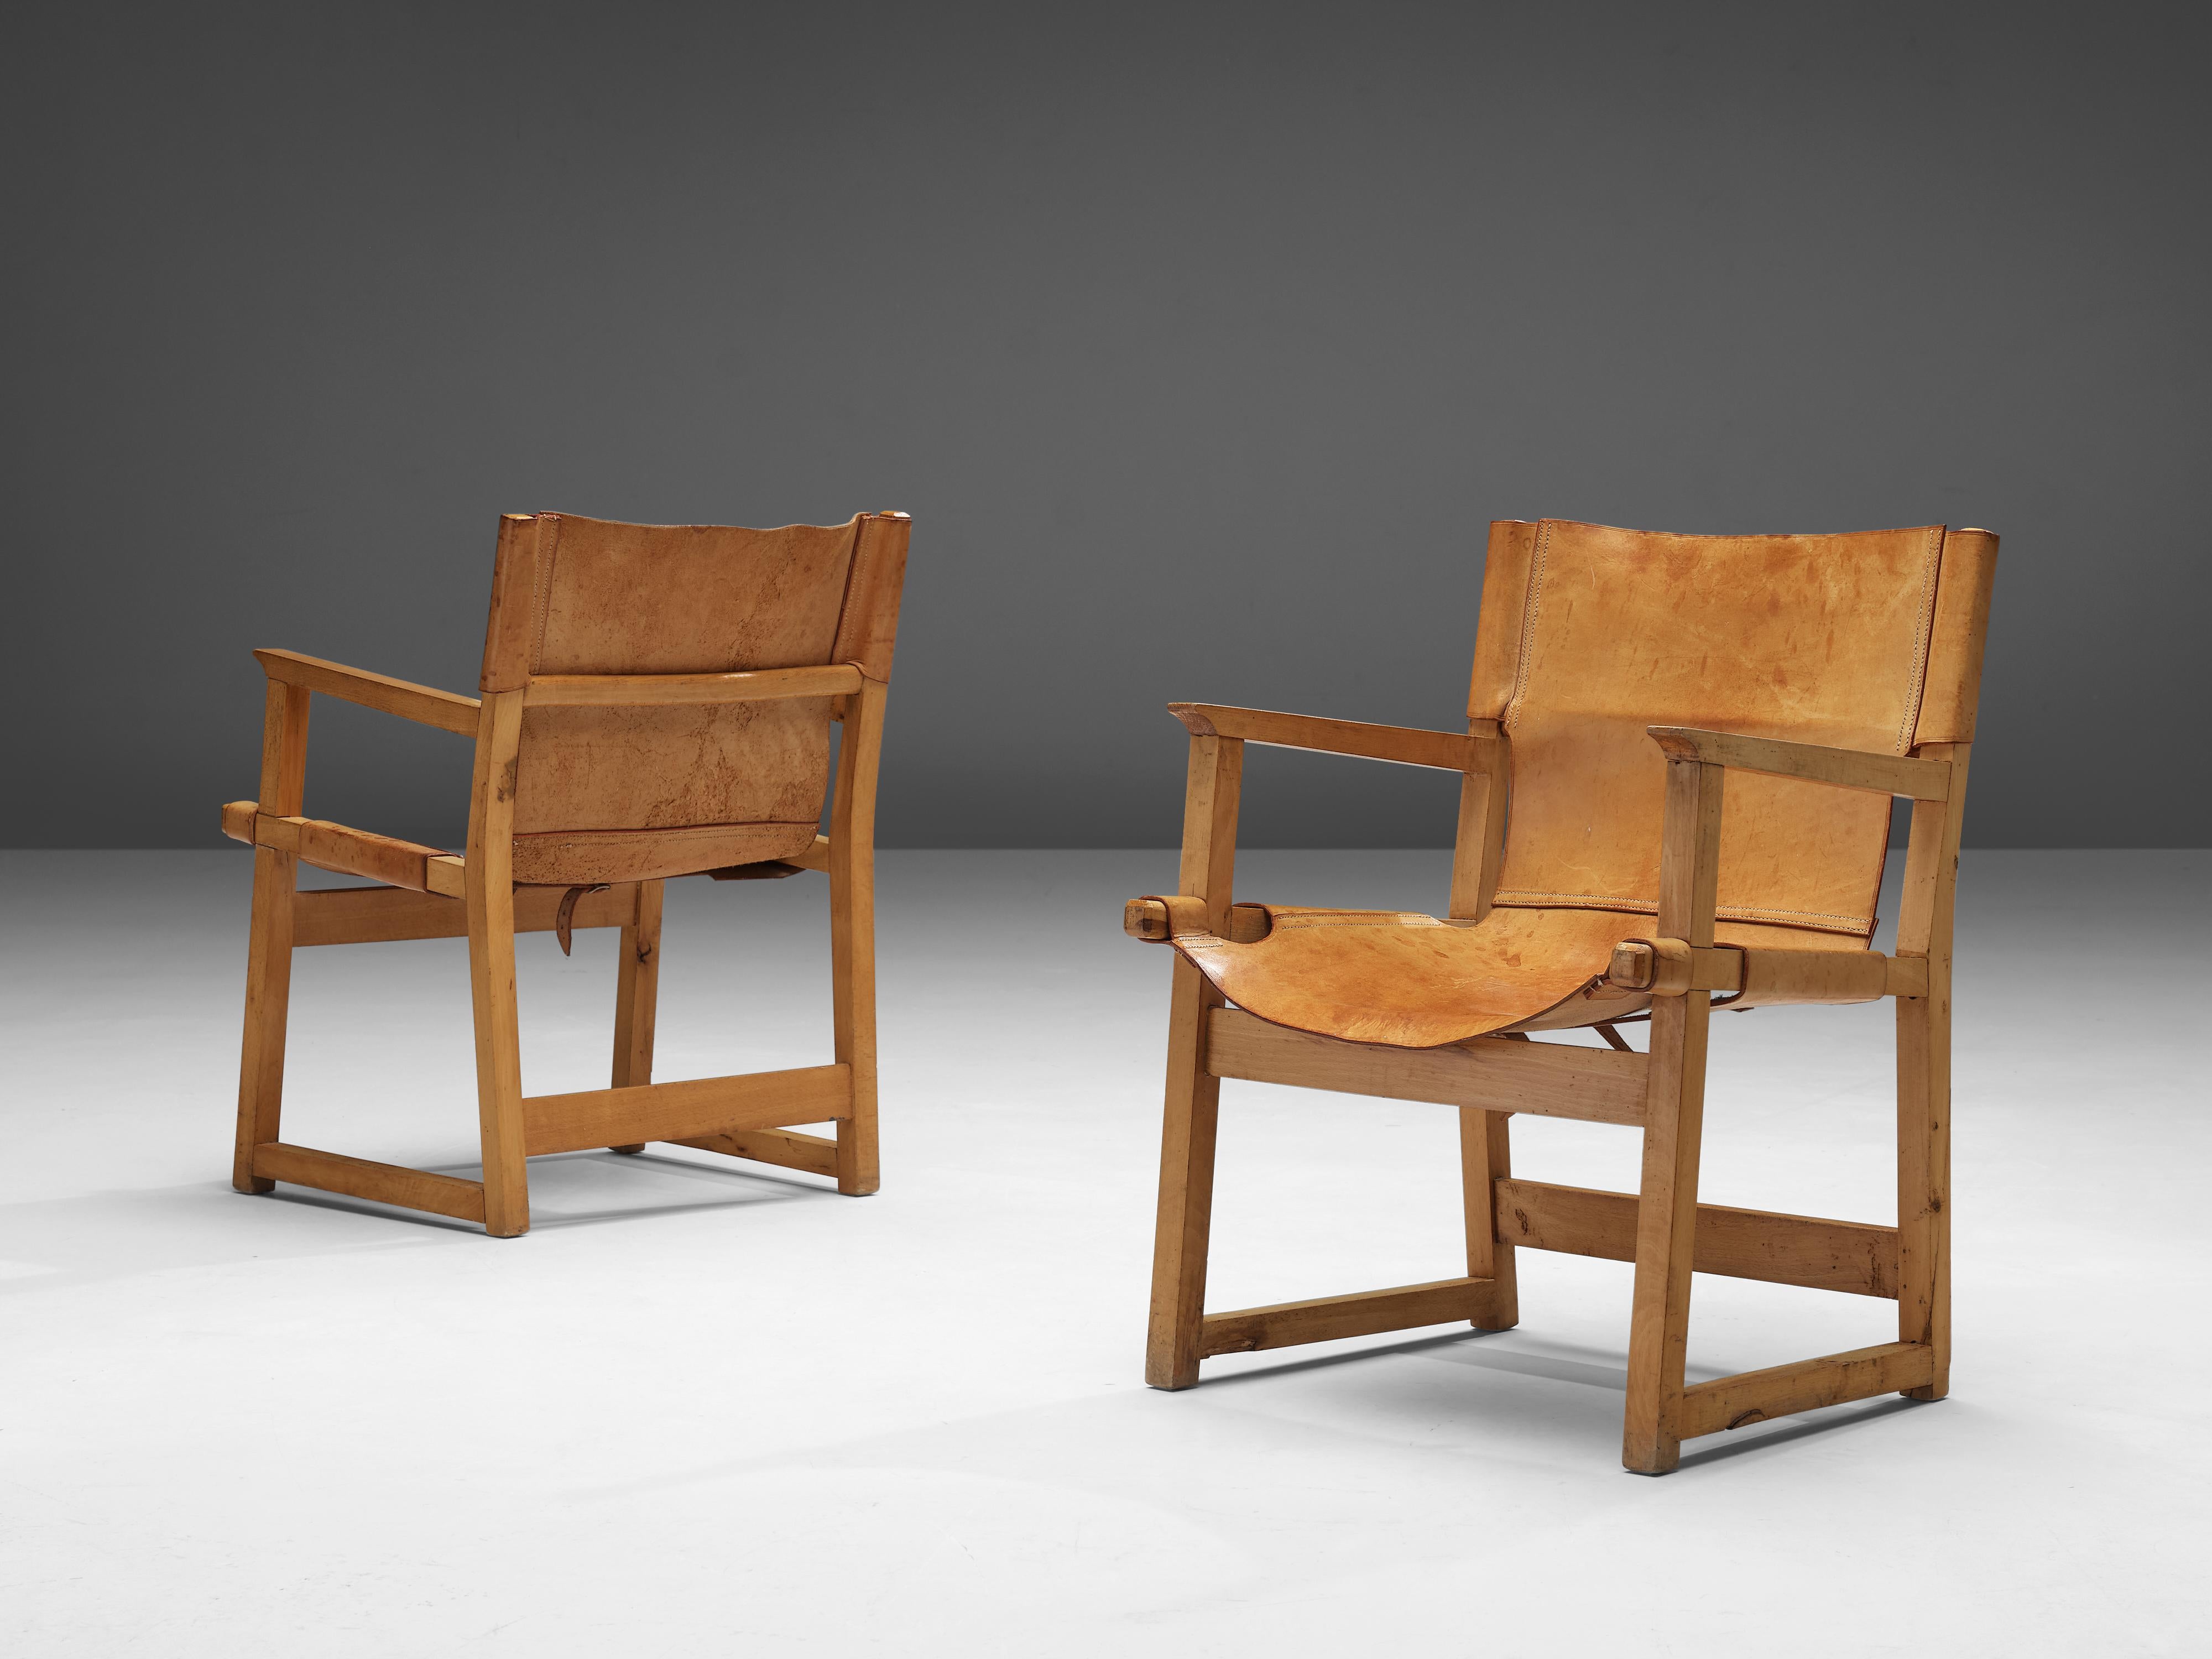 Paco Muñoz, pair of armchairs, leather, beech, Spain, 1950s

Midcentury Safari or ‘Riaza’ armchairs by Spanish designer Paco Muñoz. These chairs are created out of high quality saddle leather with removable buckles underneath the seating. The